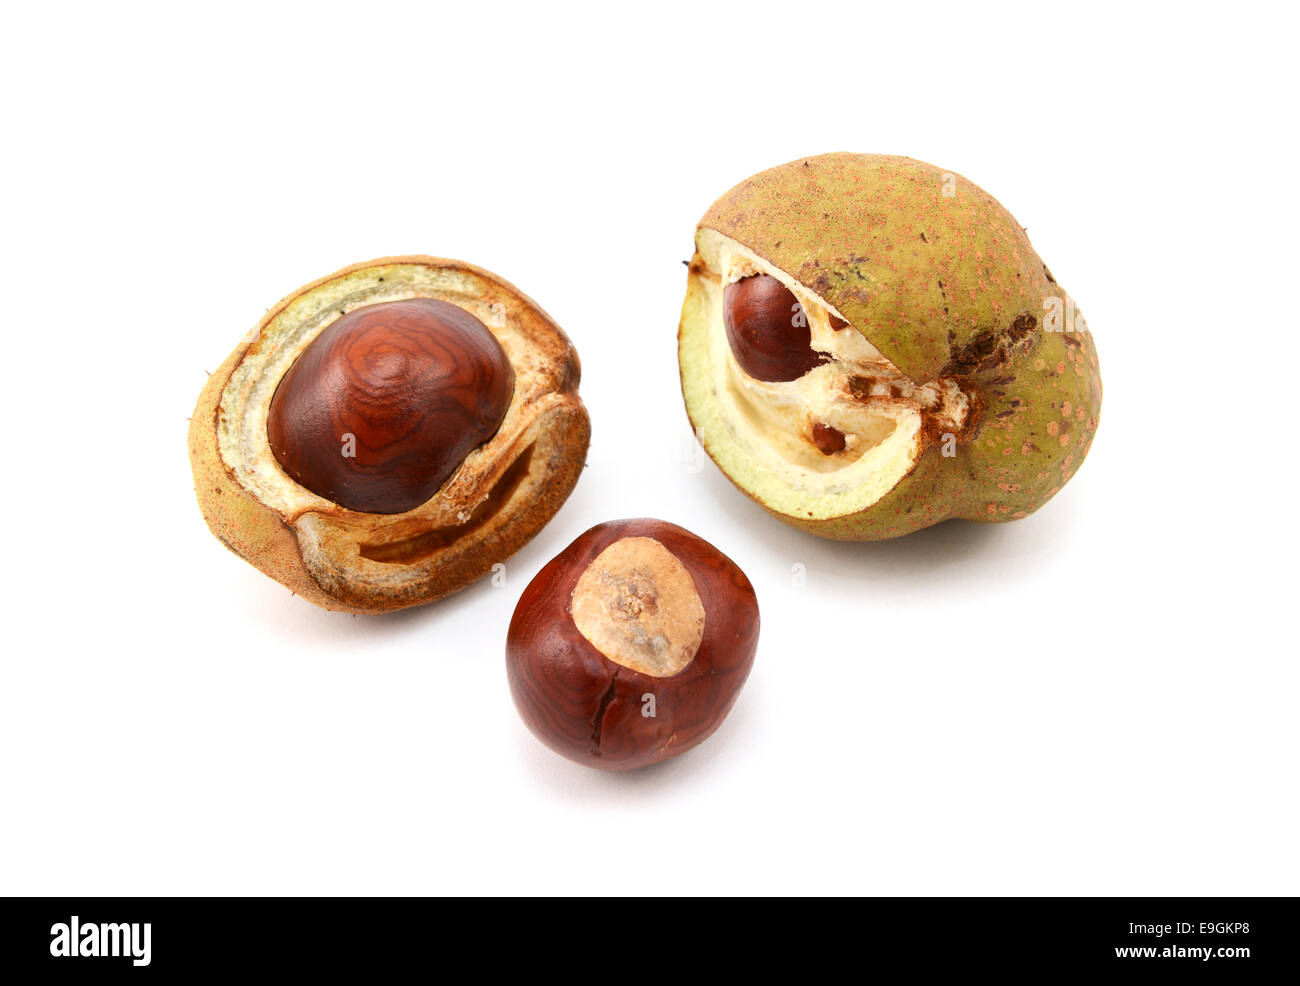 Conker and opened seed cases from a red horse chestnut tree, isolated on a white background Stock Photo